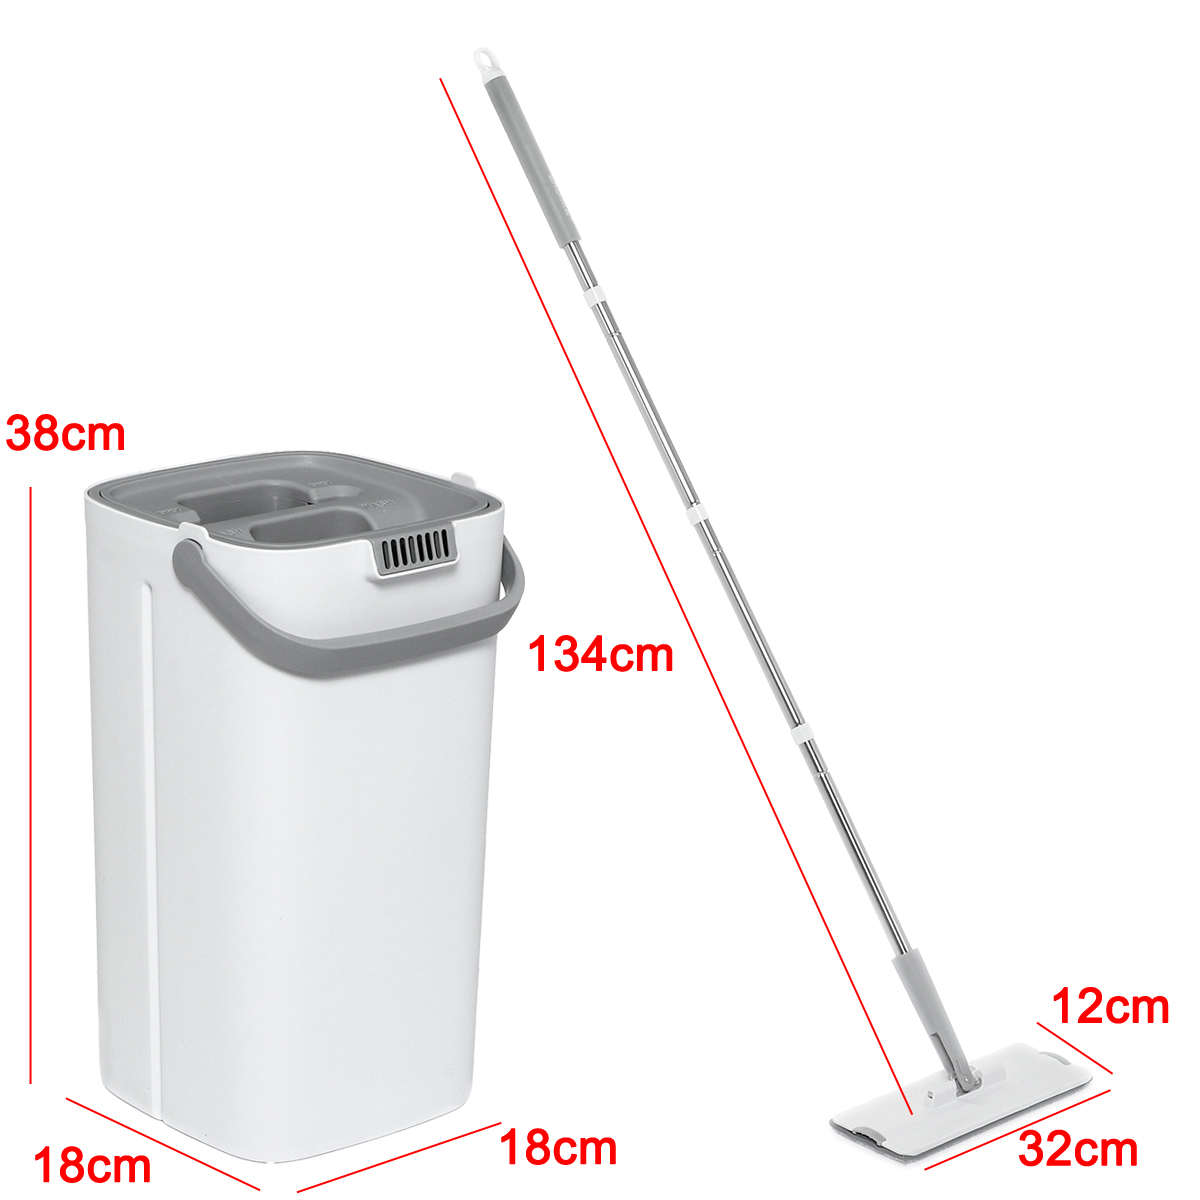 Dry-Wet-Automatic-Spin-Mop-Floor-Cleaner-Washing-Fiber-Hand-Cleaning-Dust-Fast-1588119